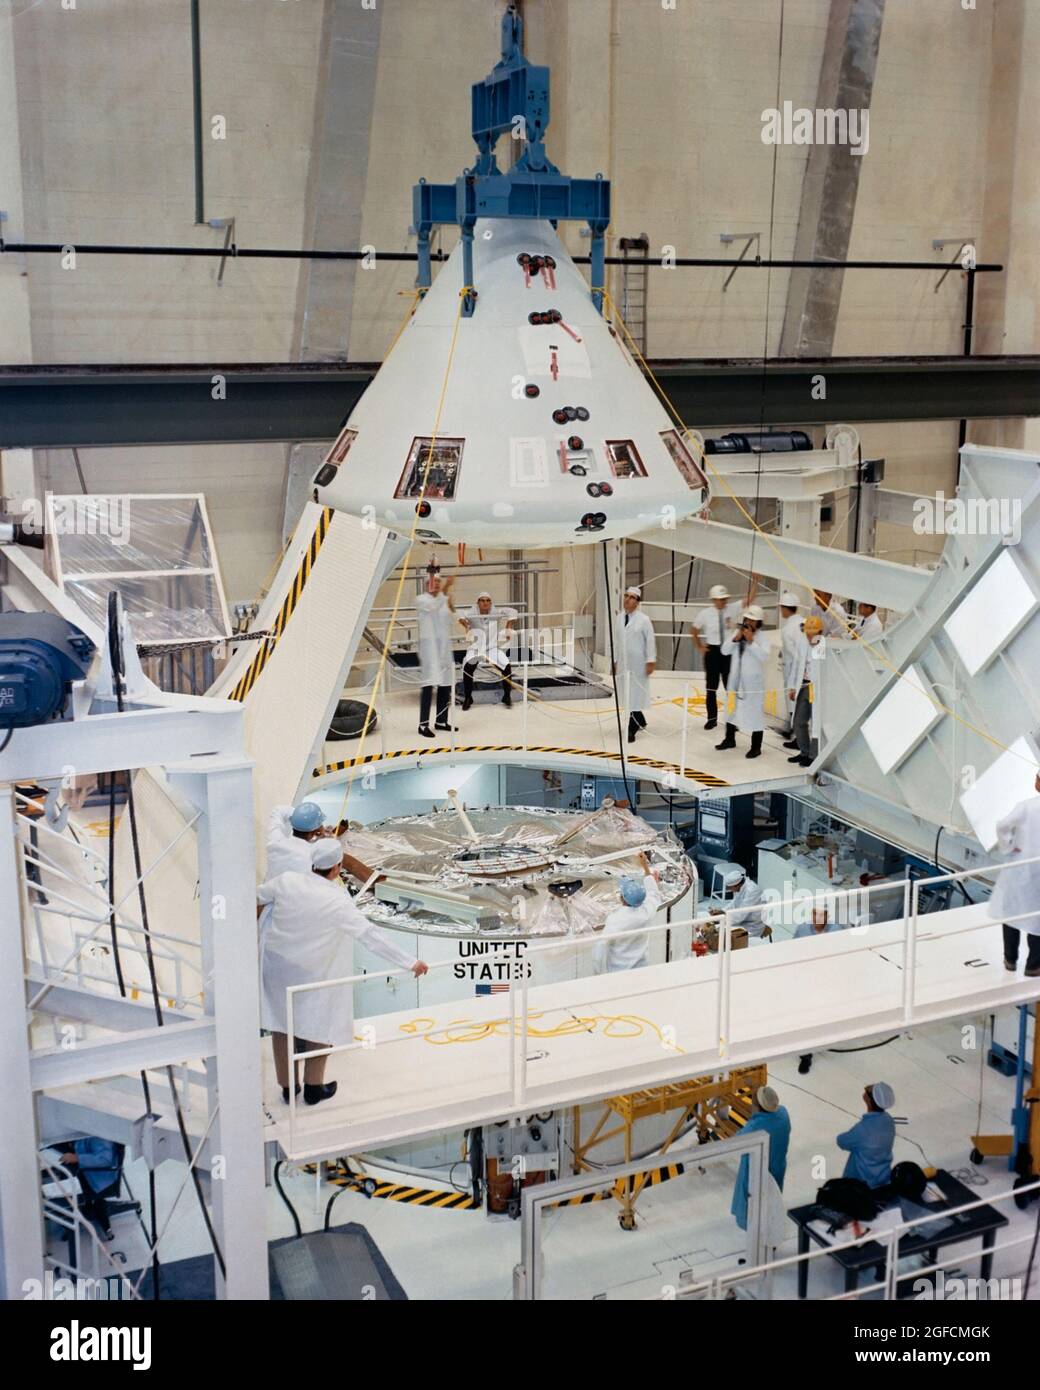 (6 Dec. 1967) --- Apollo Spacecraft 020 Command Module is hoisted into position for mating with Service Module in the Kennedy Space Center's Manned Spacecraft Operations Building. Spacecraft 020 will be flown on the Apollo 6 (Spacecraft 020/Saturn 502) unmanned, Earth-orbital space mission Stock Photo